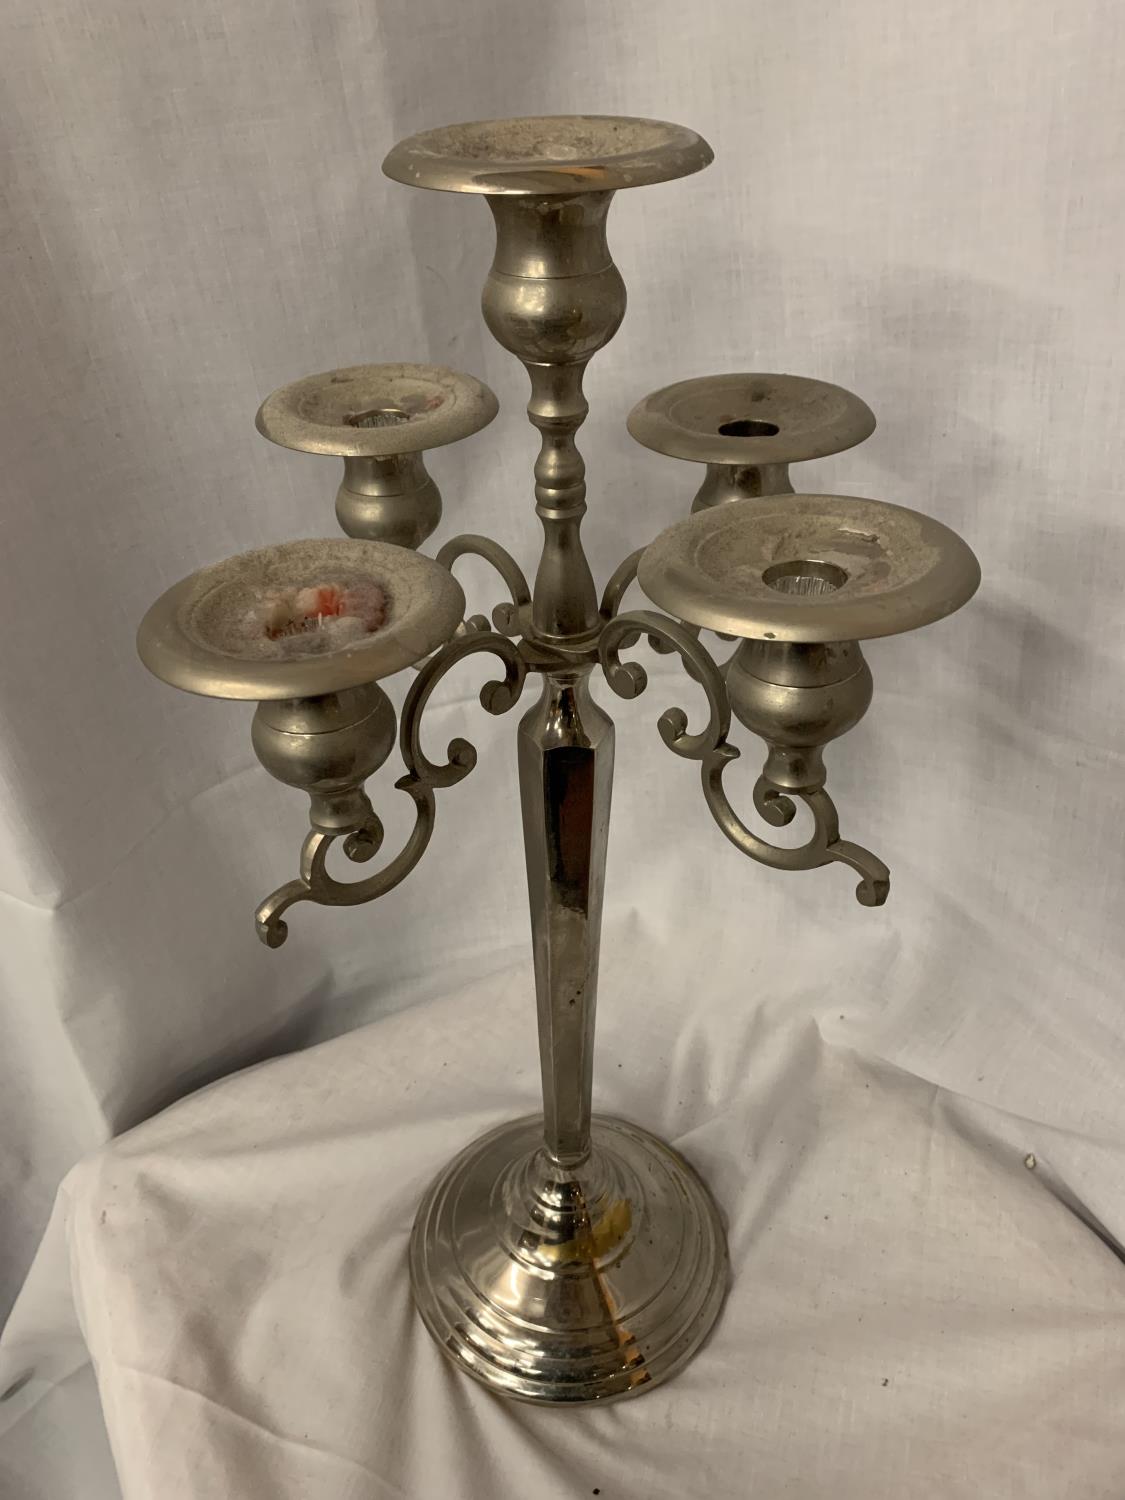 A TALL ORNATE CHROME FIVE BRANCH CANDLEABRA